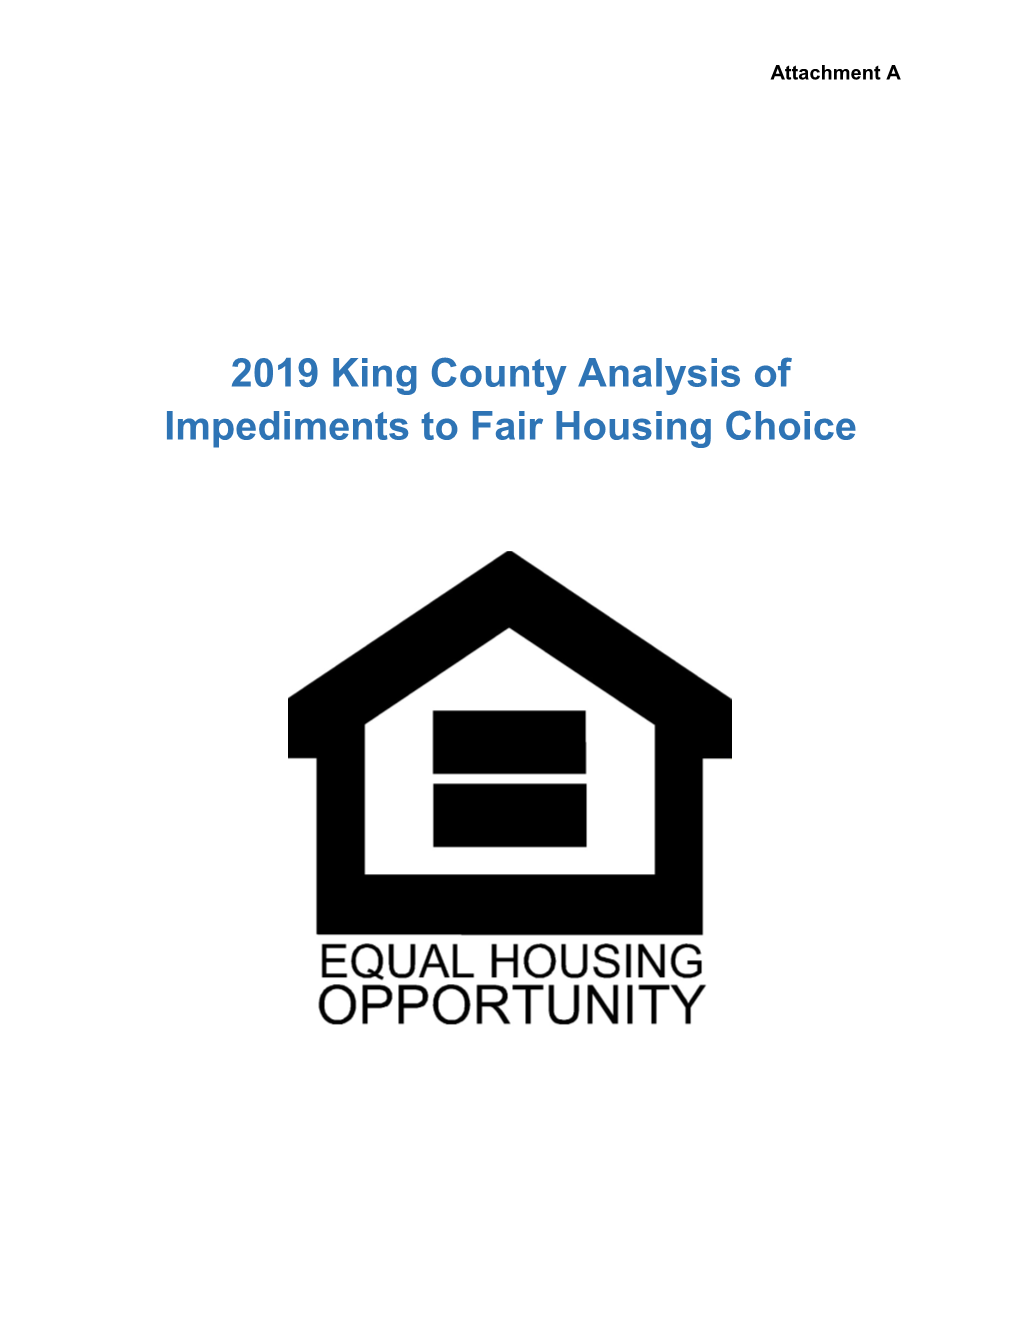 2019 King County Analysis of Impediments to Fair Housing Choice